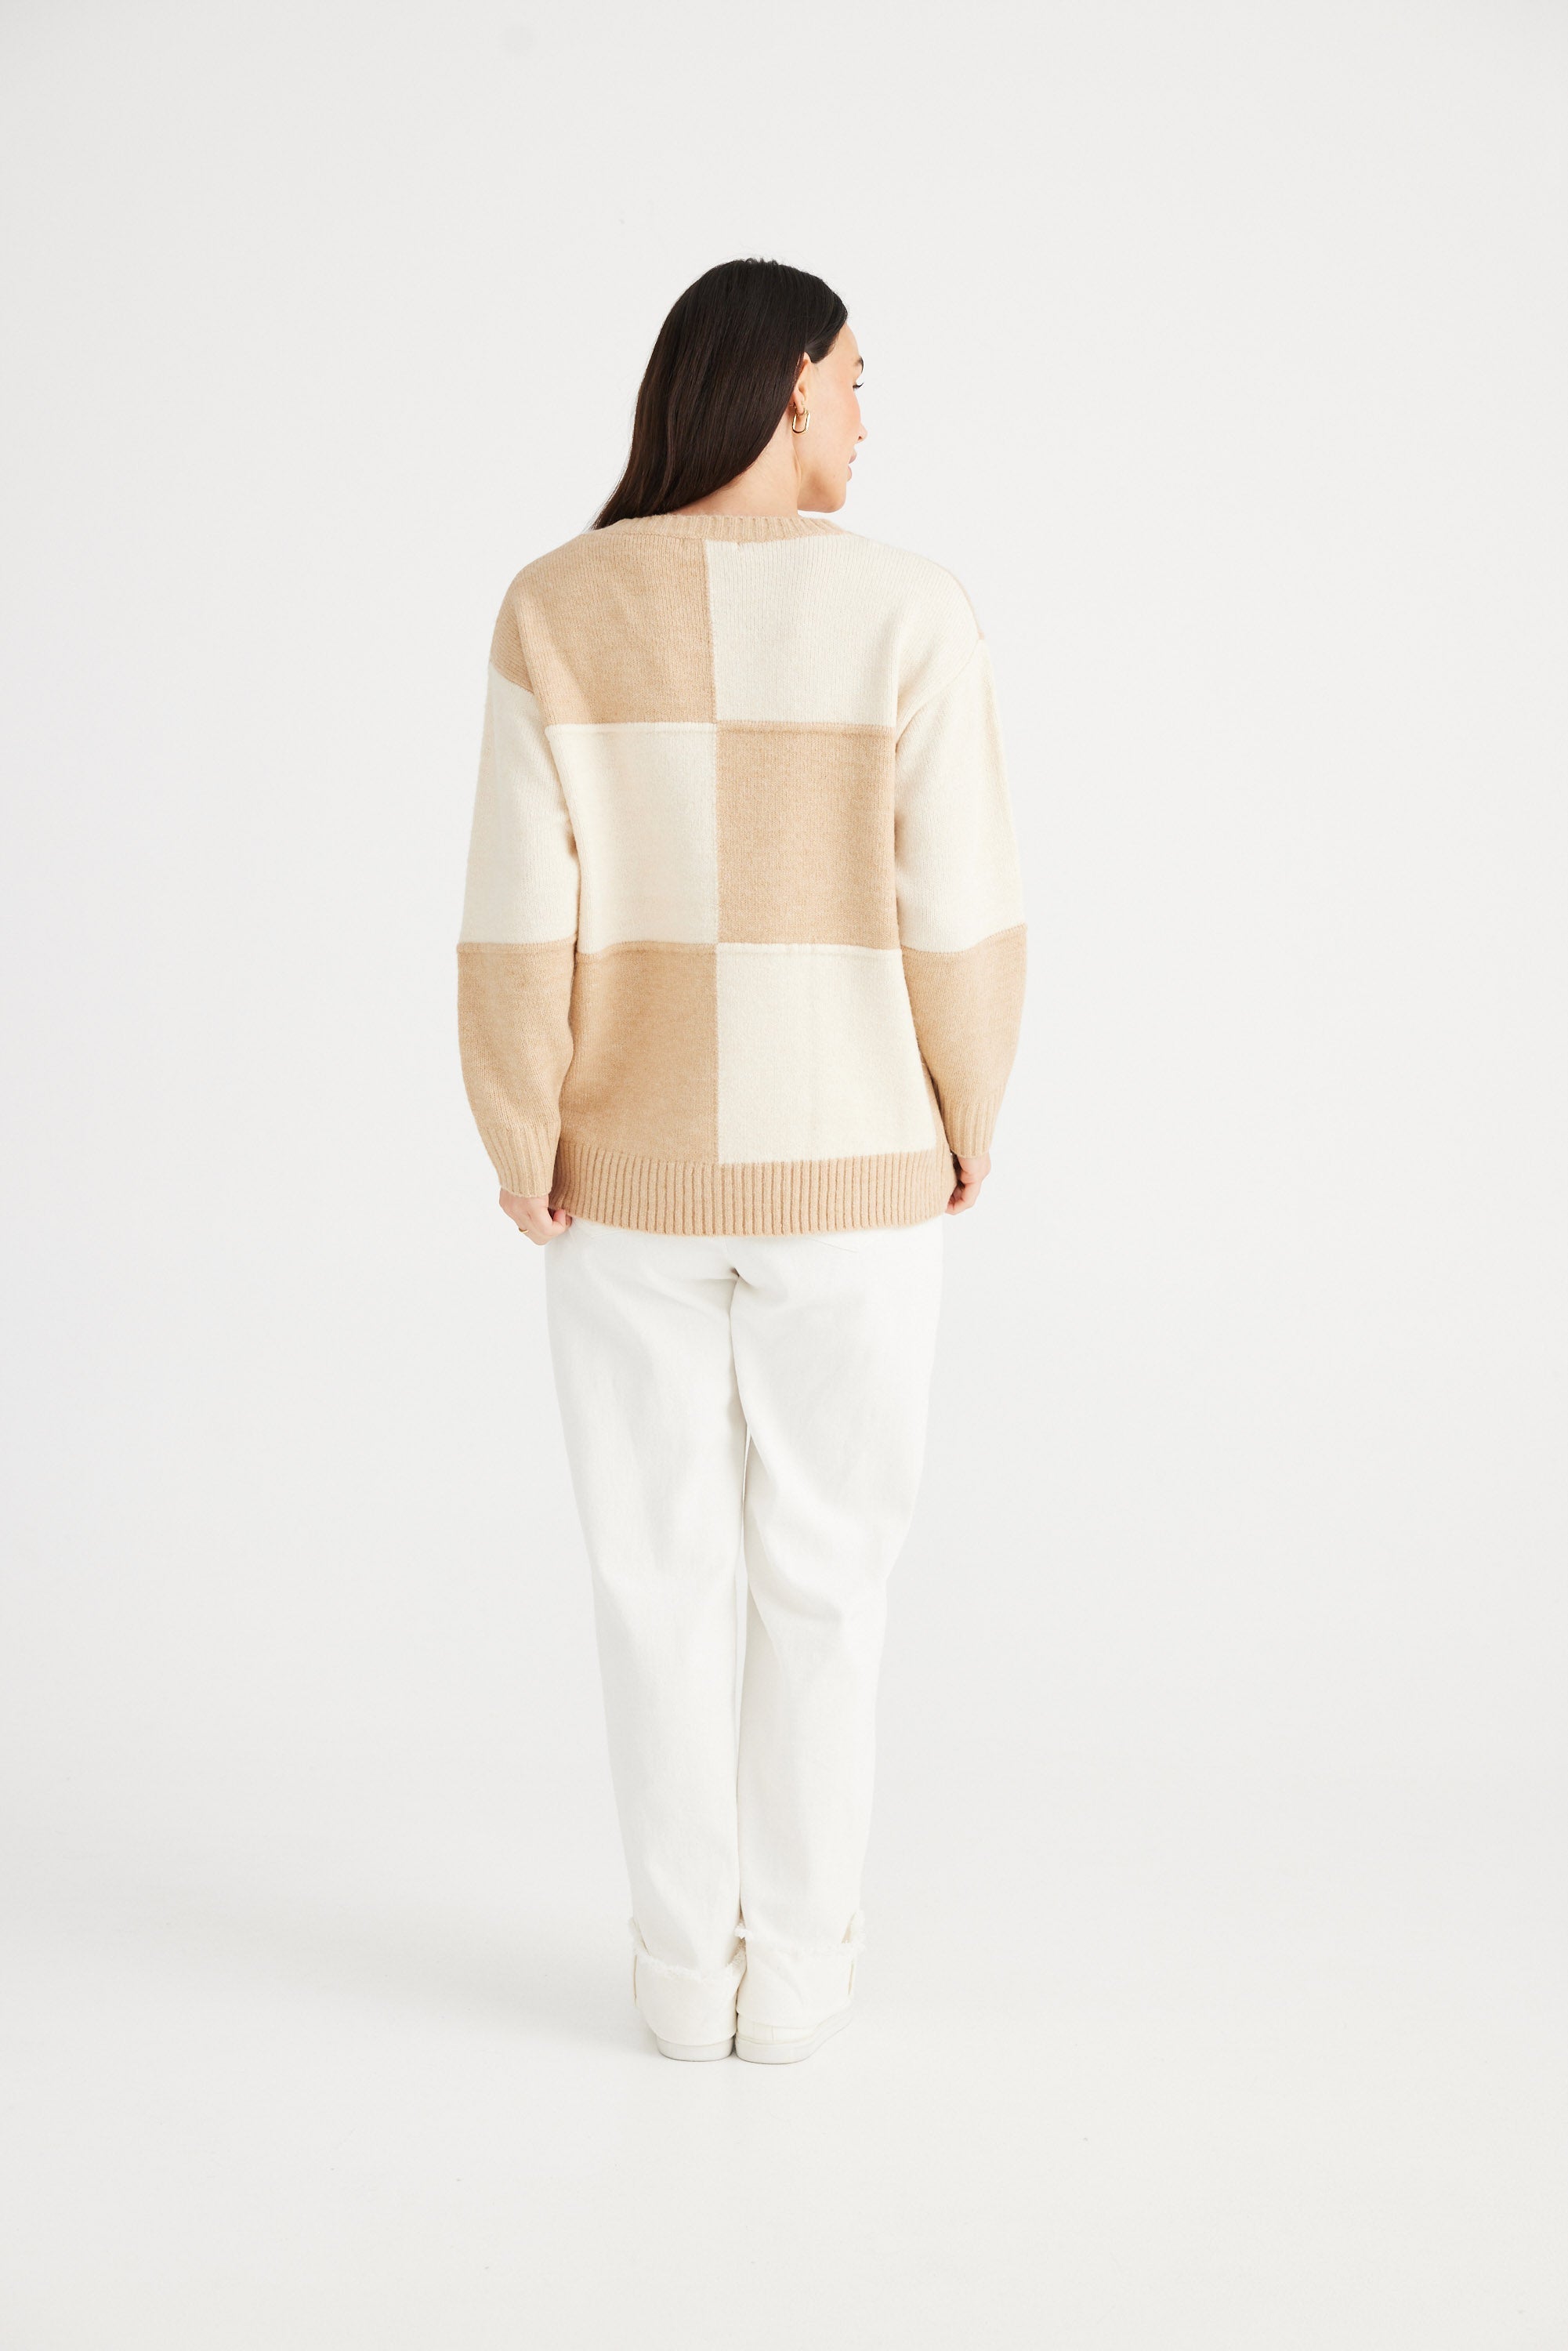 Hamilton Knit - Natural-Knitwear & Jumpers-Brave & True-The Bay Room